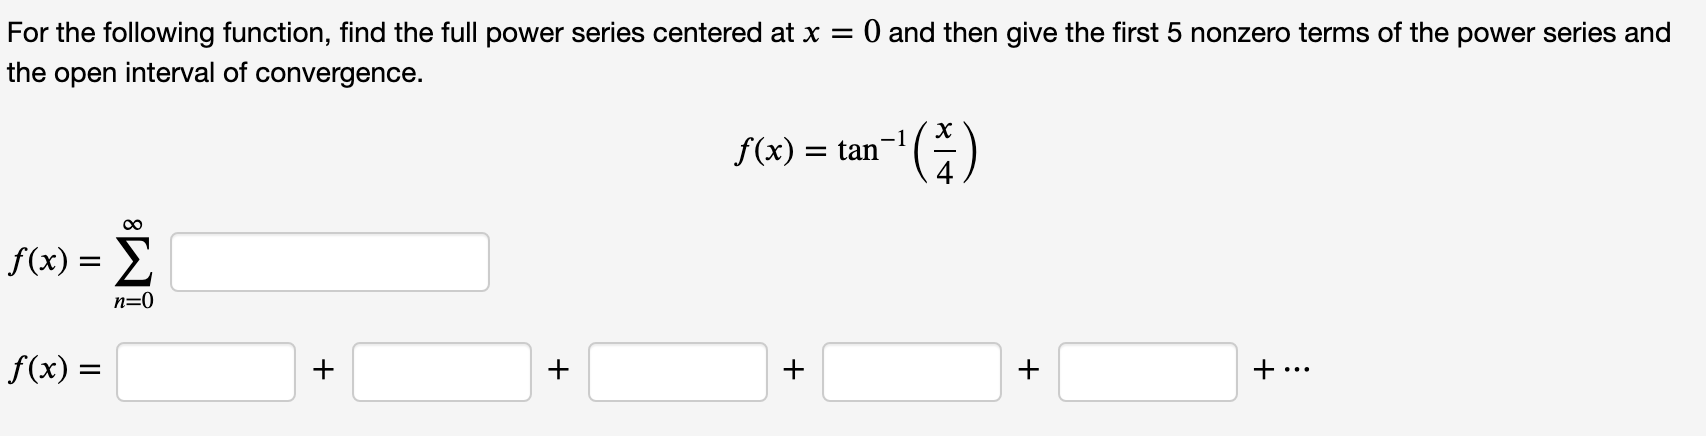 For the following function, find the full power series centered at x = 0 and then give the first 5 nonzero terms of the power series and
the open interval of convergence.
-1
f(x) = tan"
f(x) = 2
Σ
n=0
f(x) =
+
+
+
+
+...
